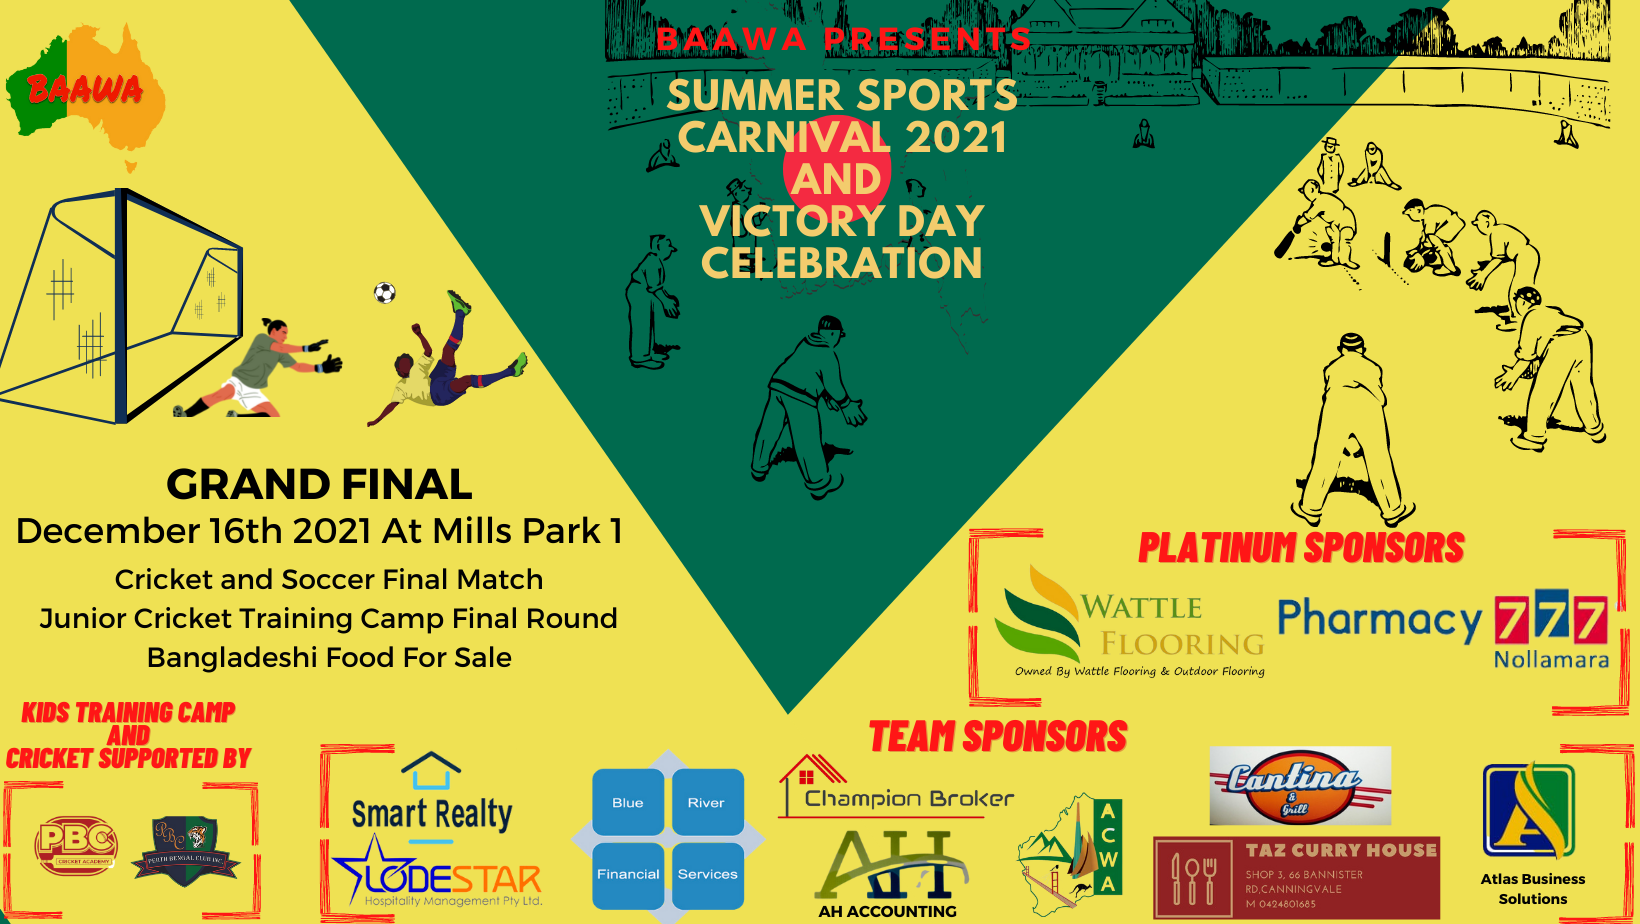 Copy of BAAWA Summer Sports Carnival 2021-2022 and Victory Day Celebration Posters (Facebook Cover) (5).png